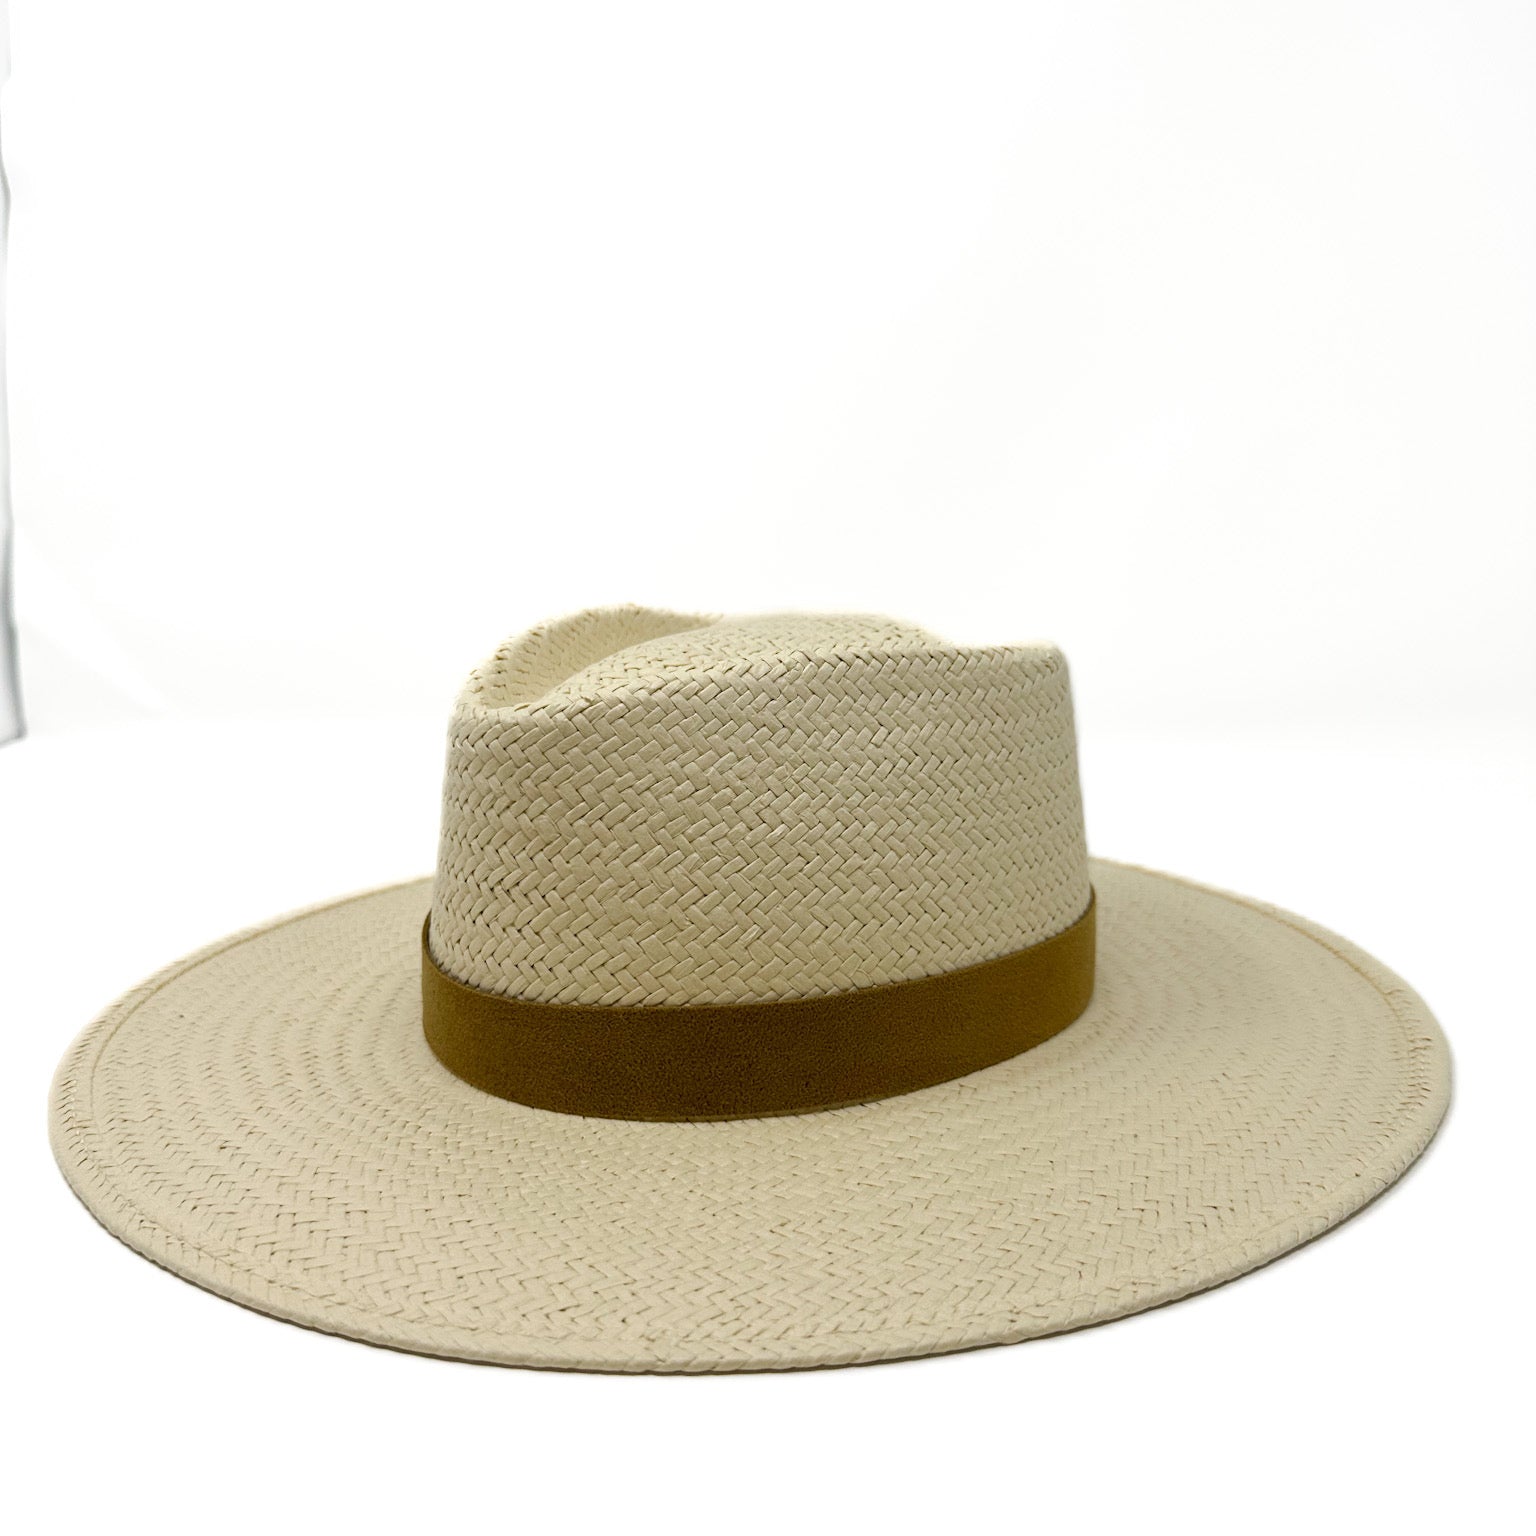 SAN PANCHO PACKABLE STRAW FEDORA shell